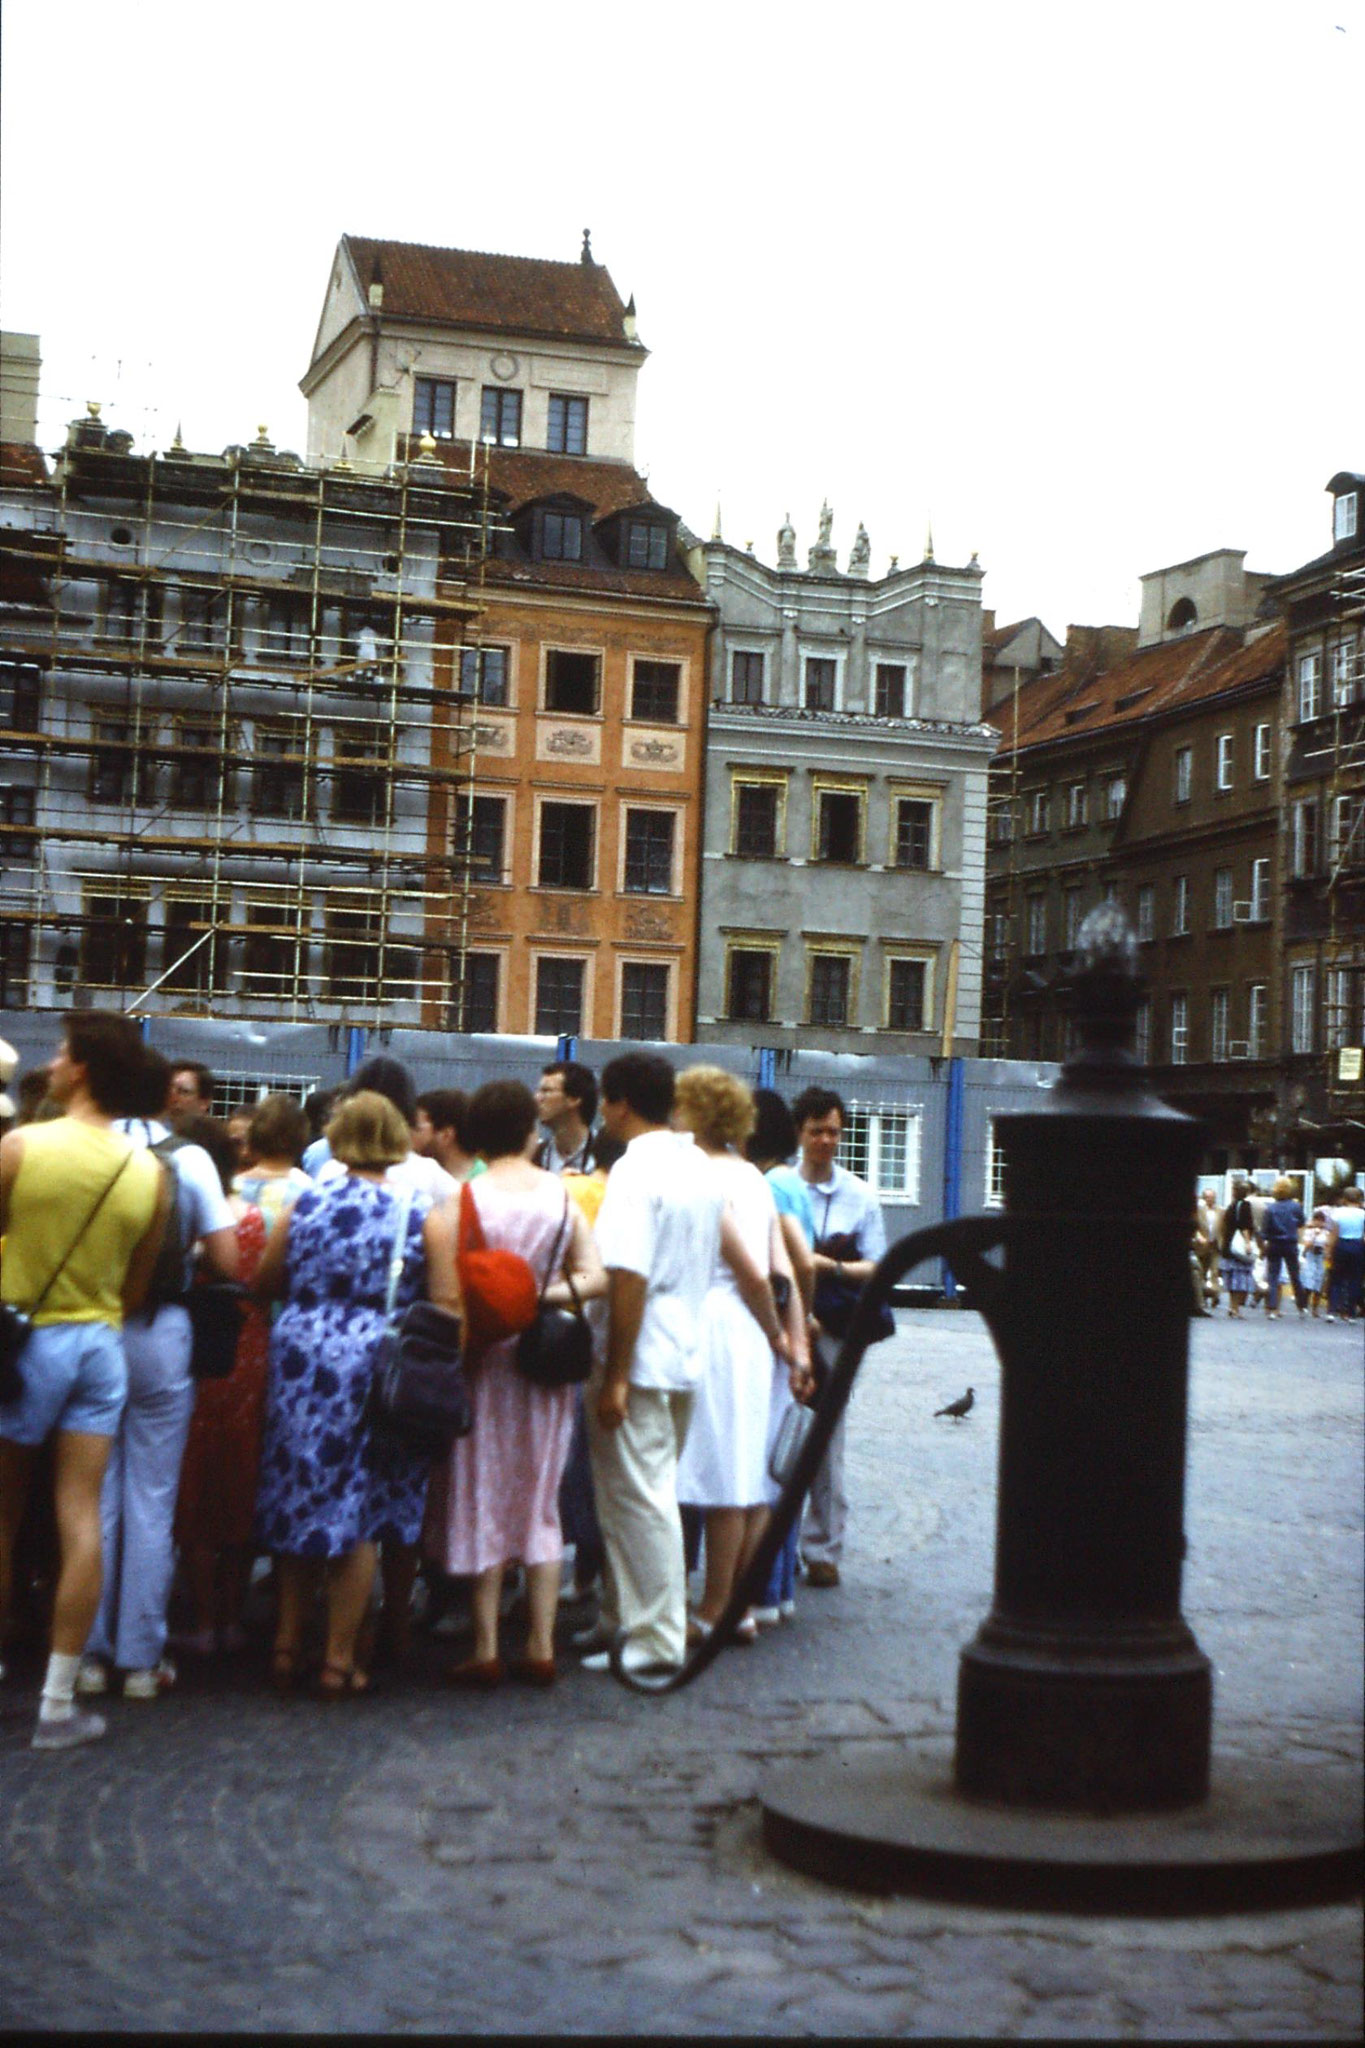 22/8/1988: 1: Warsaw central square in Old Town